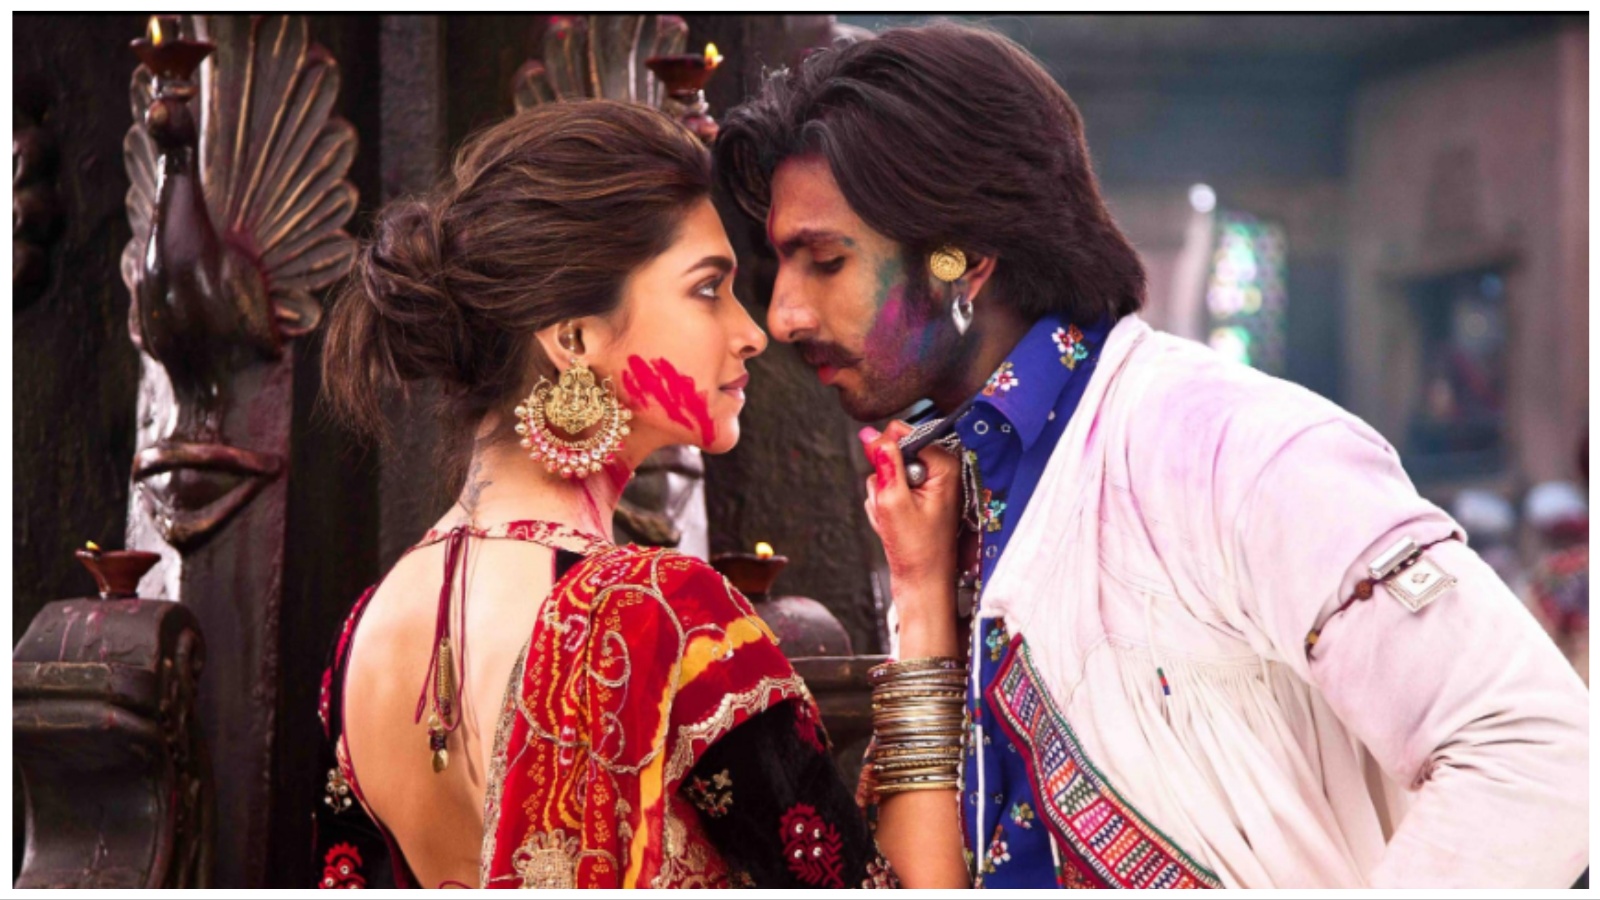 Ram Leela Xxx Sex Full Video - Gulshan Devaiah recalls witnessing Ranveer Singh and Deepika Padukone's  chemistry on sets of Ram-Leela: 'He was really serious about her butâ€¦' |  Bollywood News - The Indian Express